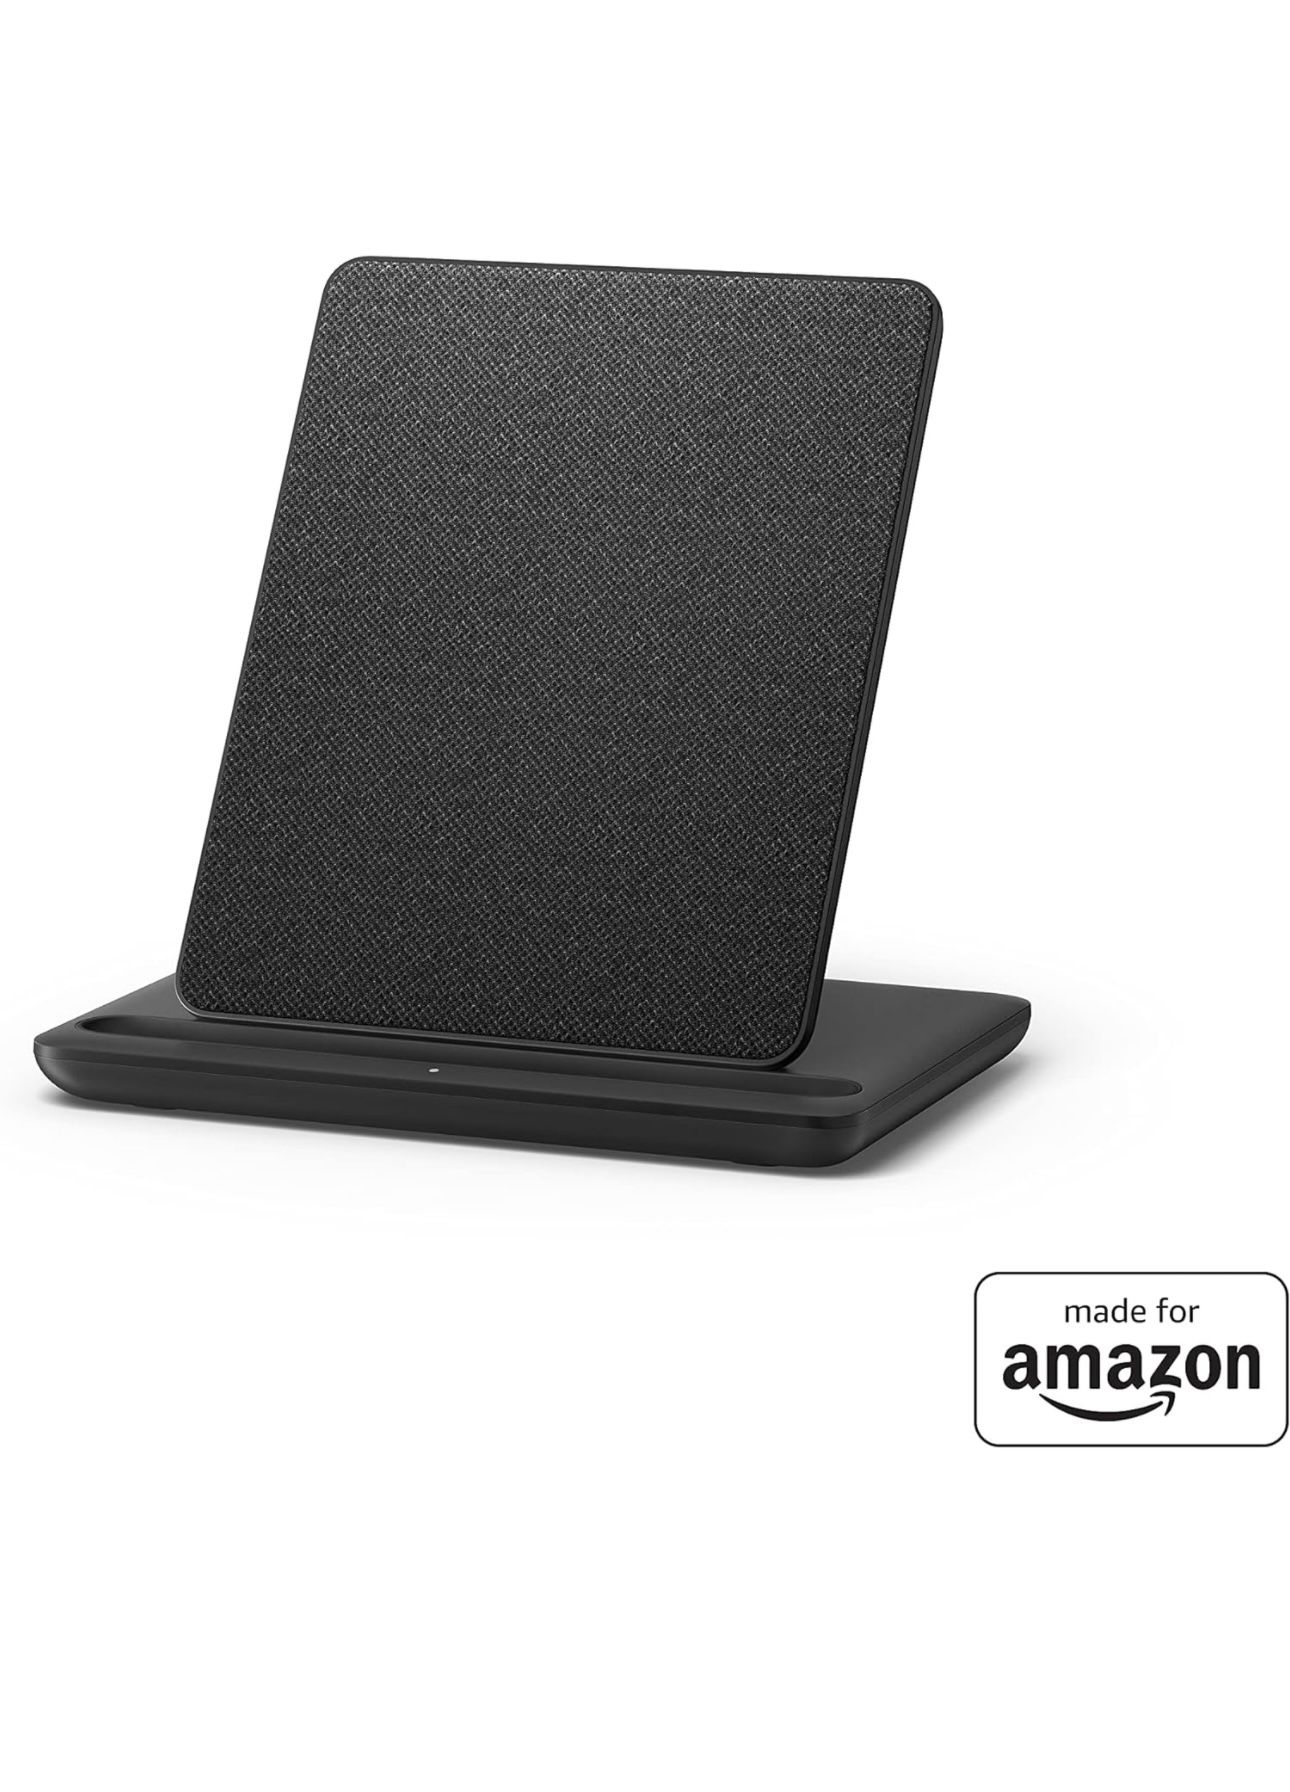 Made for Amazon, Wireless Charging Dock for Kindle Paperwhite Signature Edition. Only compatible with Kindle Paperwhite Signature Edition. 